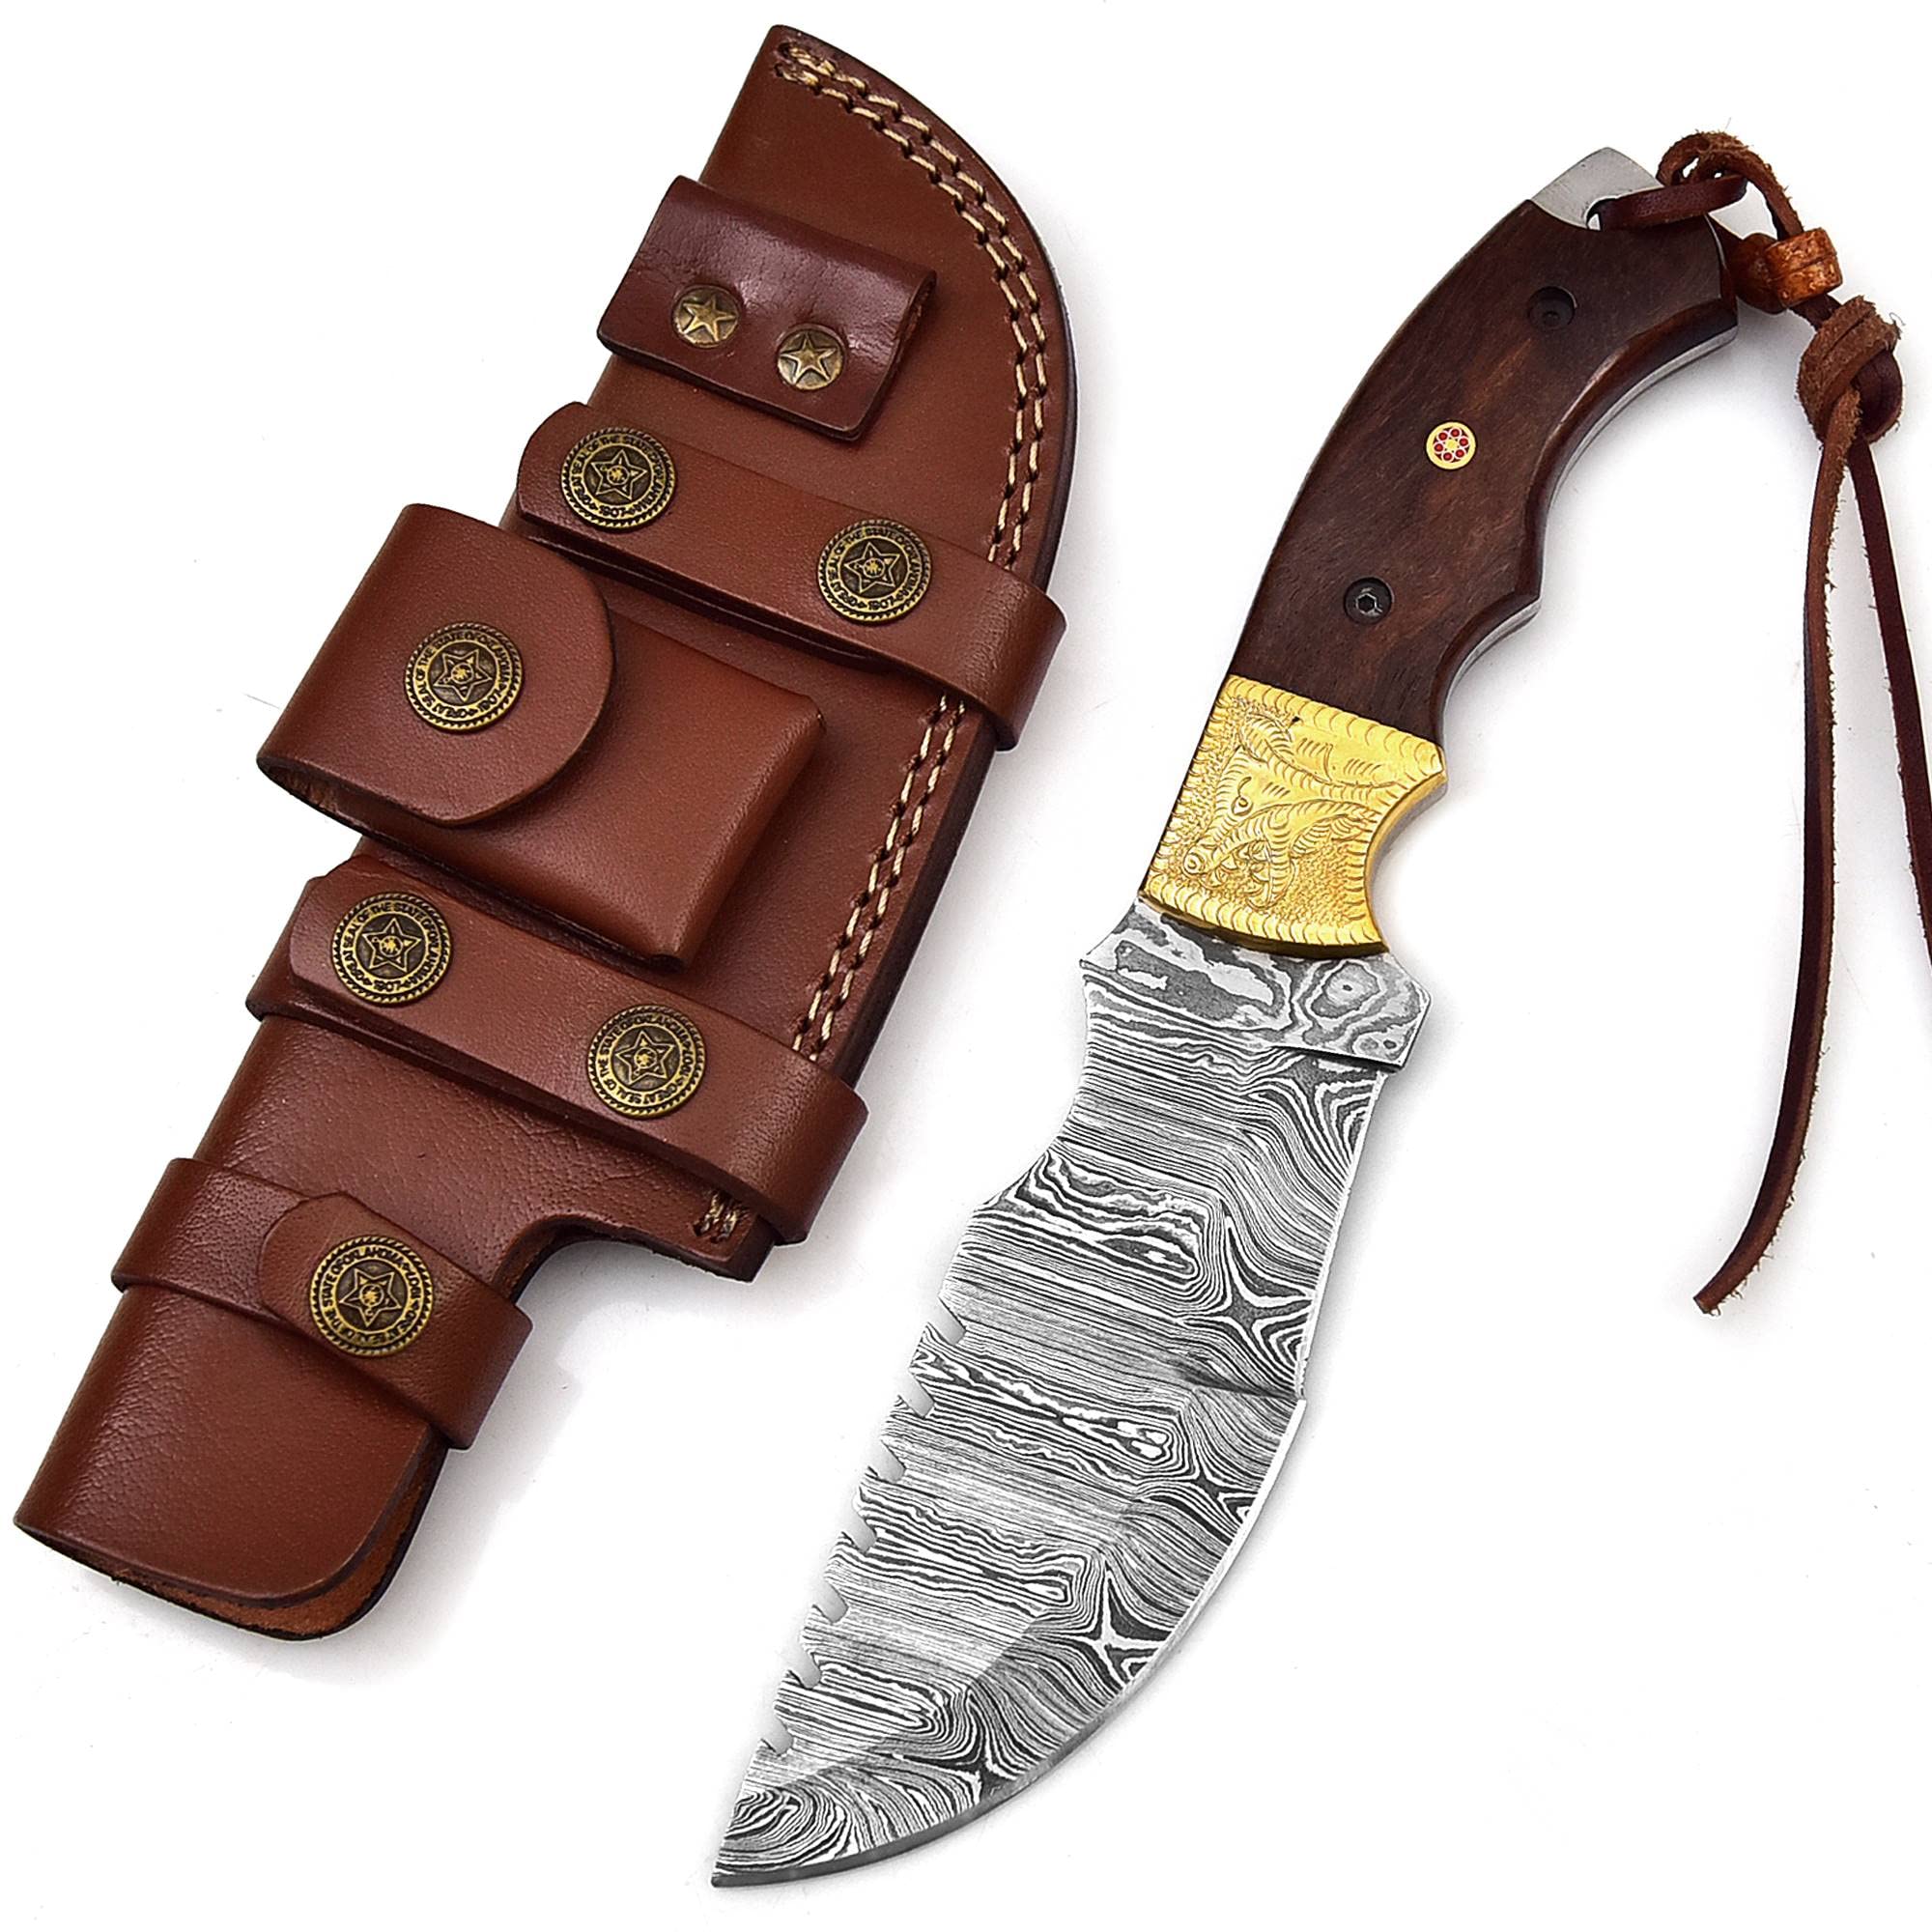 Hand-Forged Damascus Steel Blade - Perfect for Hunting, Camping with  Leather Sheath